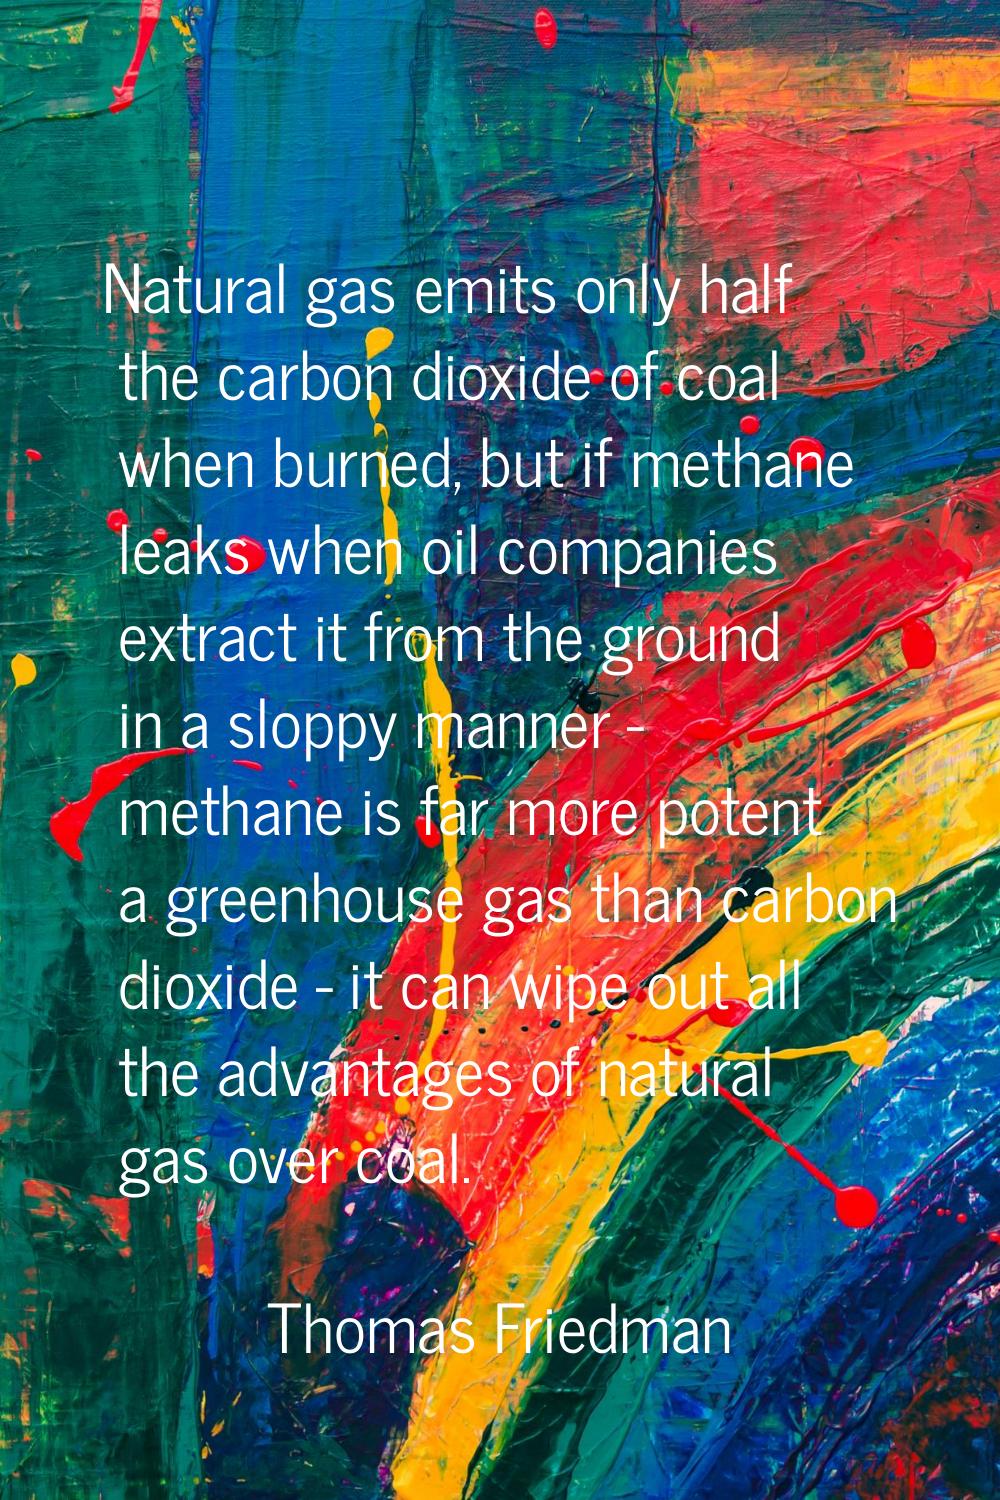 Natural gas emits only half the carbon dioxide of coal when burned, but if methane leaks when oil c